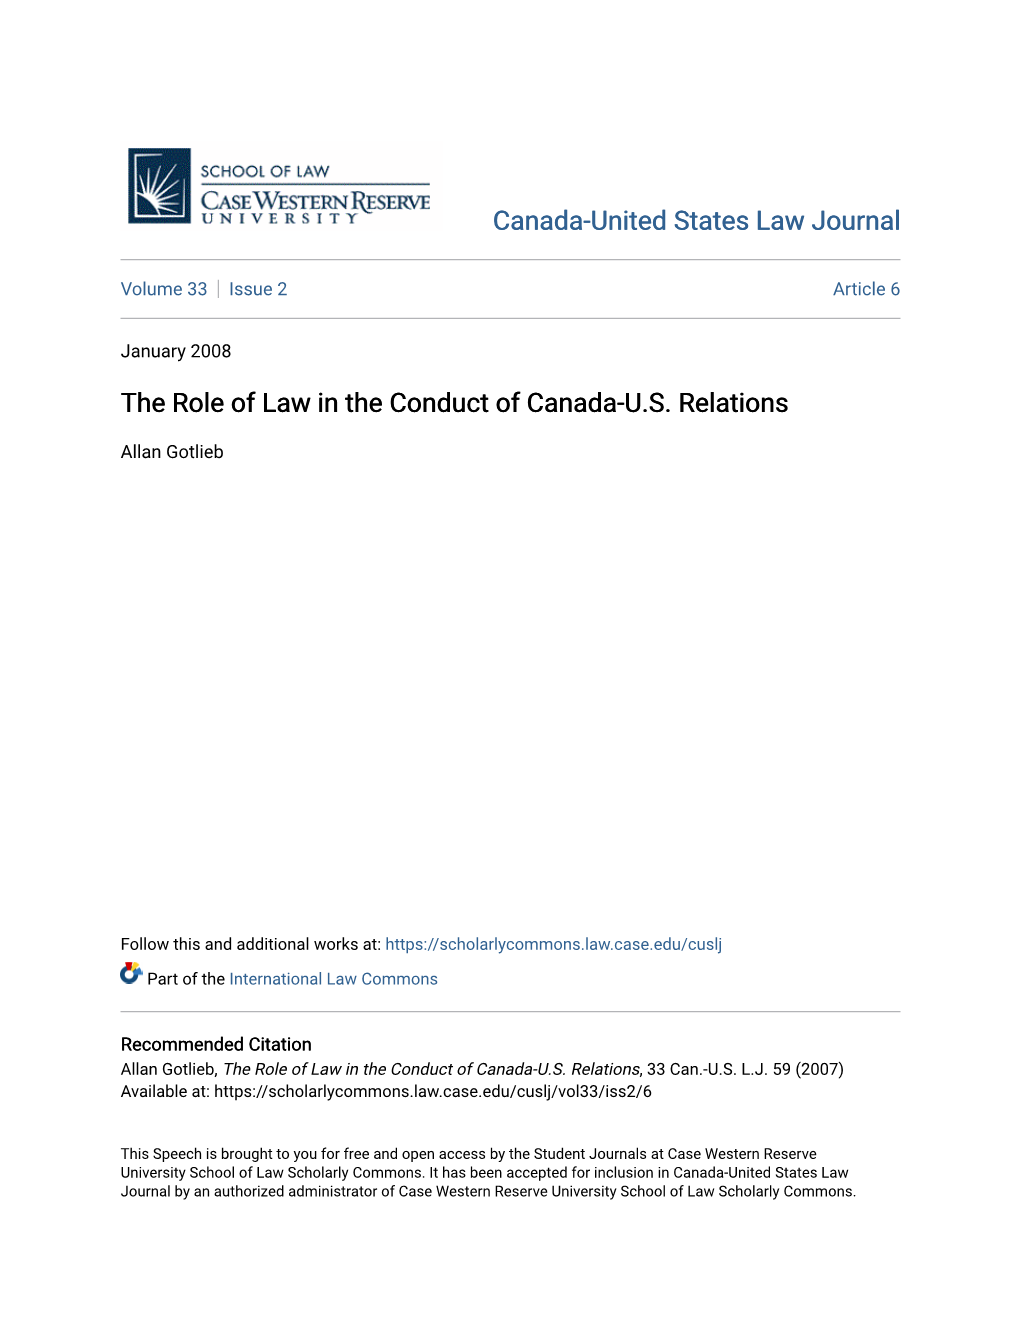 The Role of Law in the Conduct of Canada-U.S. Relations